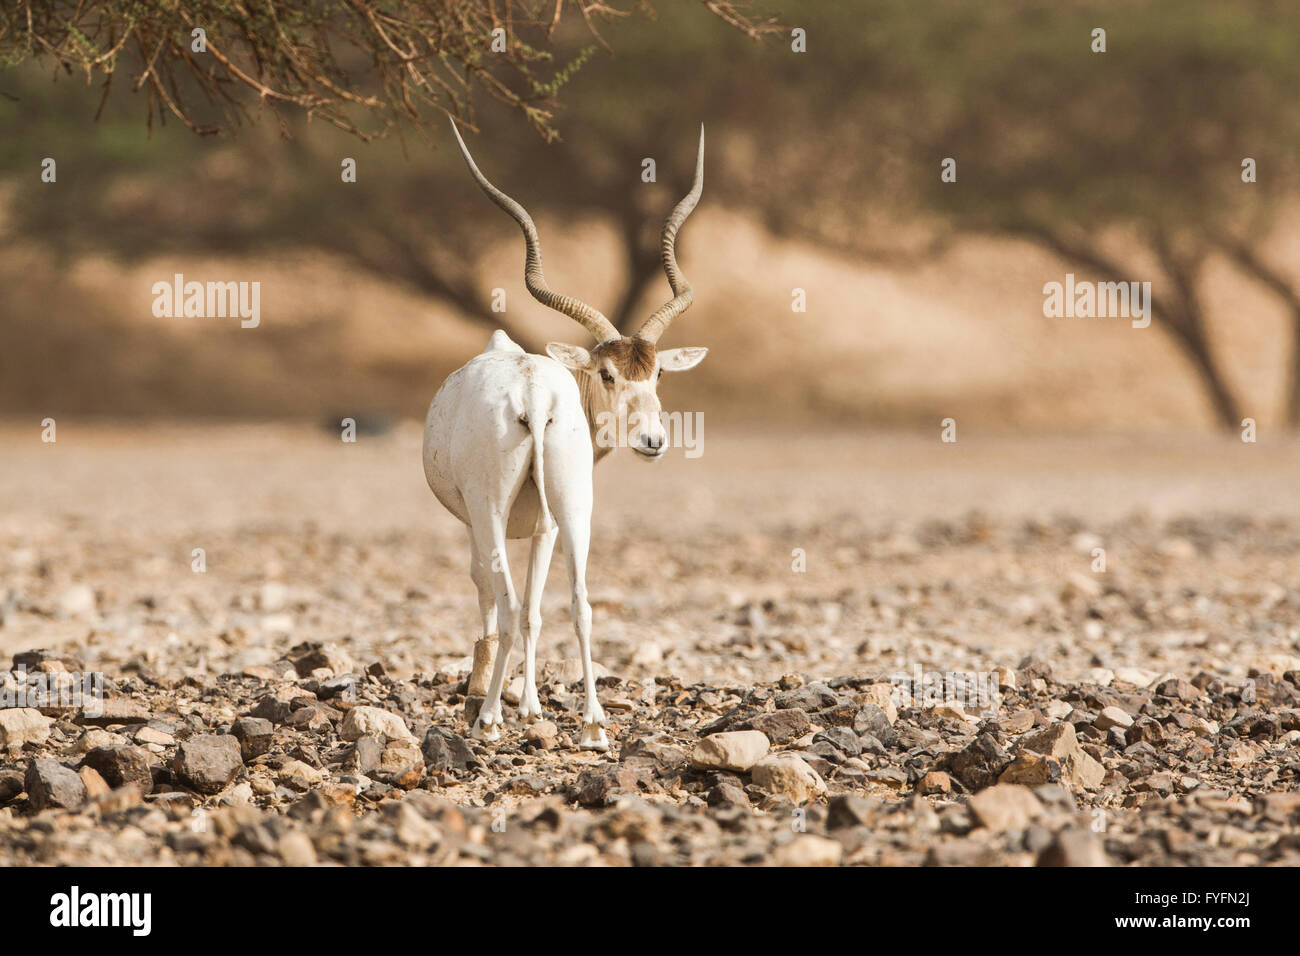 Addax (Addax nasomaculatus) in the Negev desert, Israel. Looking to camera Stock Photo